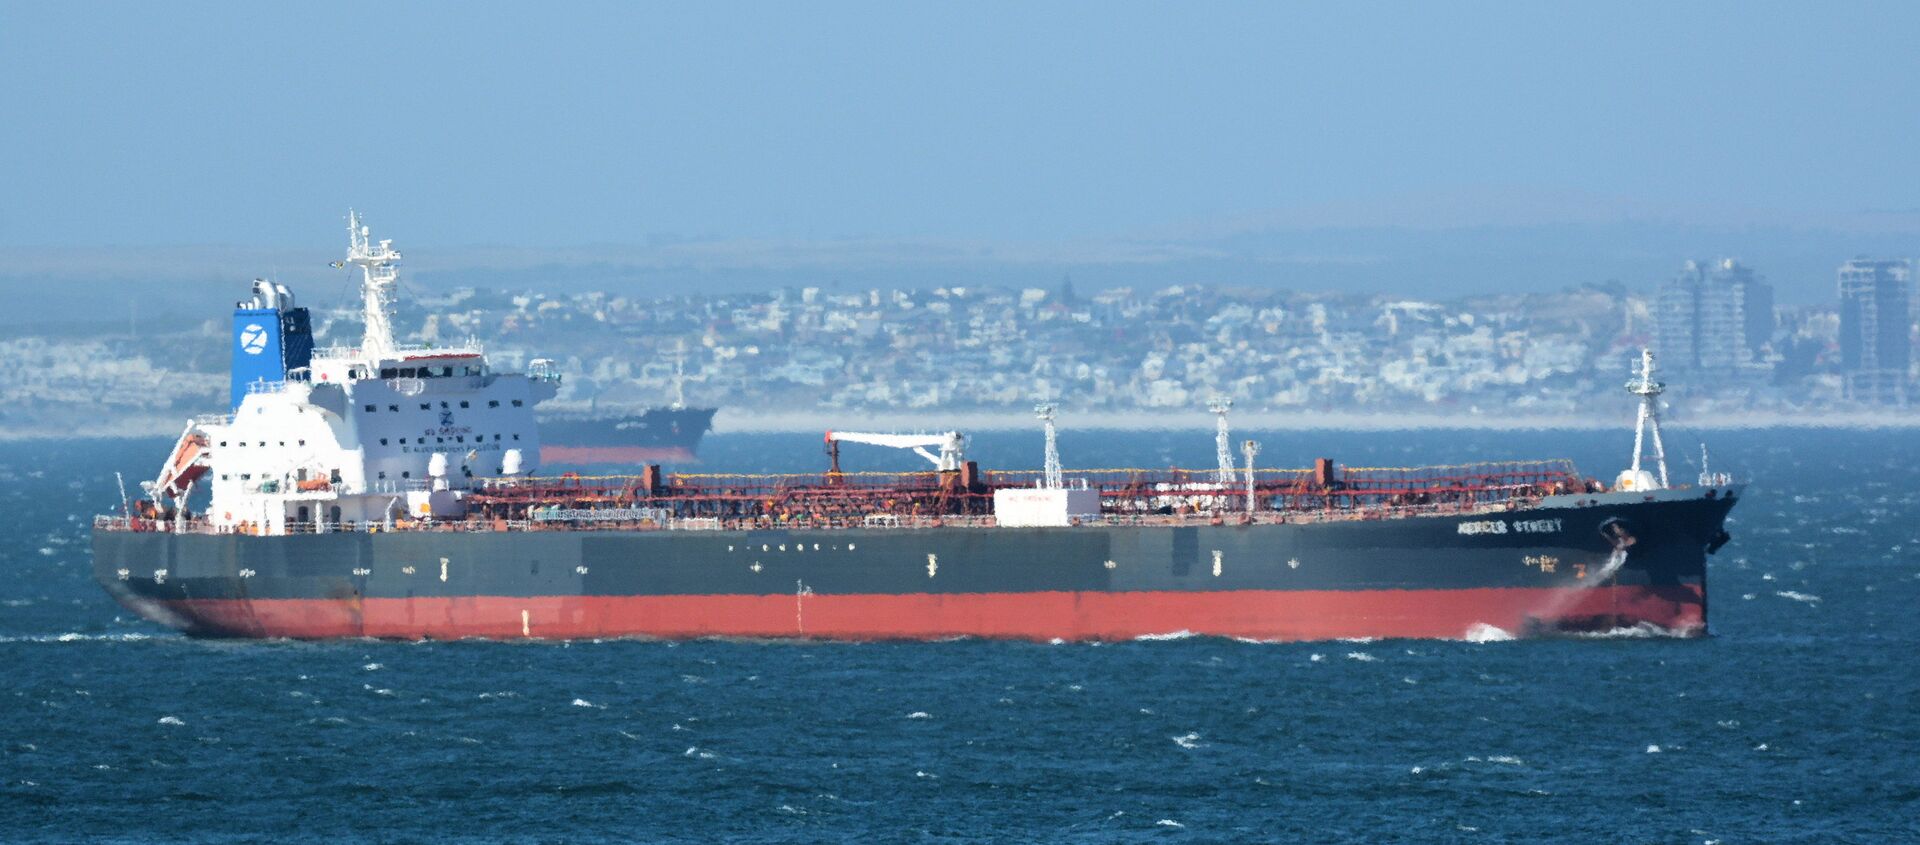 The Mercer Street, a Japanese-owned Liberian-flagged tanker managed by Israeli-owned Zodiac Maritime that was attacked off Oman coast as seen in Cape Town, South Africa, December 31, 2015  in this picture obtained from ship tracker website, MarineTraffic.com. Picture taken December 31, 2015.  Johan Victor/Handout via REUTERS THIS IMAGE HAS BEEN SUPPLIED BY A THIRD PARTY. MANDATORY CREDIT. NO RESALES. NO ARCHIVES. - Sputnik International, 1920, 01.08.2021